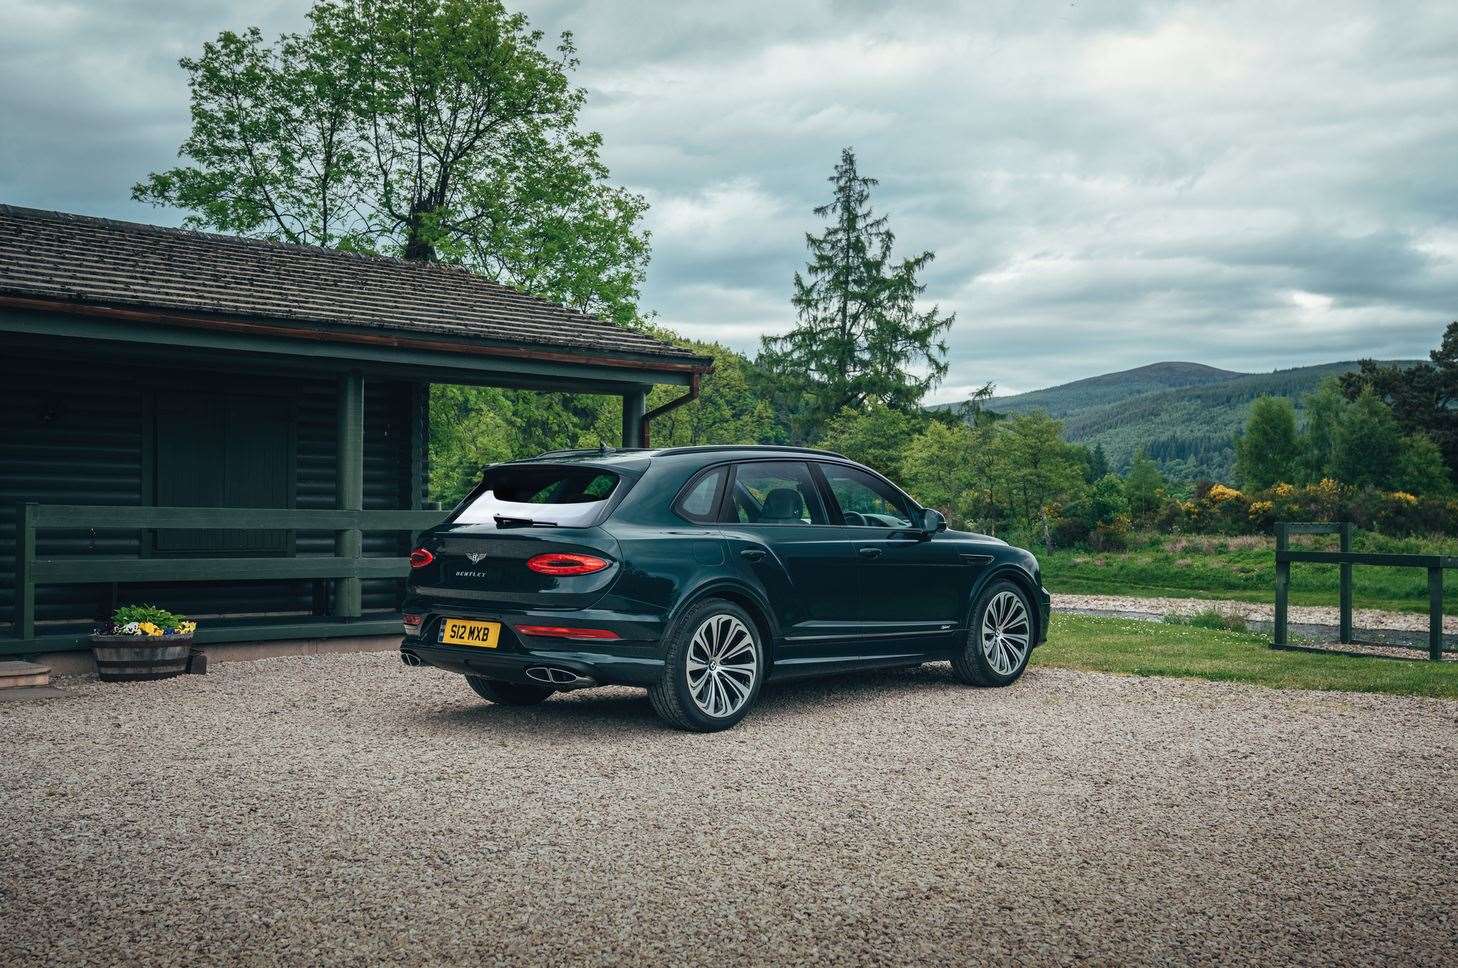 The Macallan and Bentley brand partnership was announced to coincide with the launch of the new new Hybrid Bentley in Speyside.